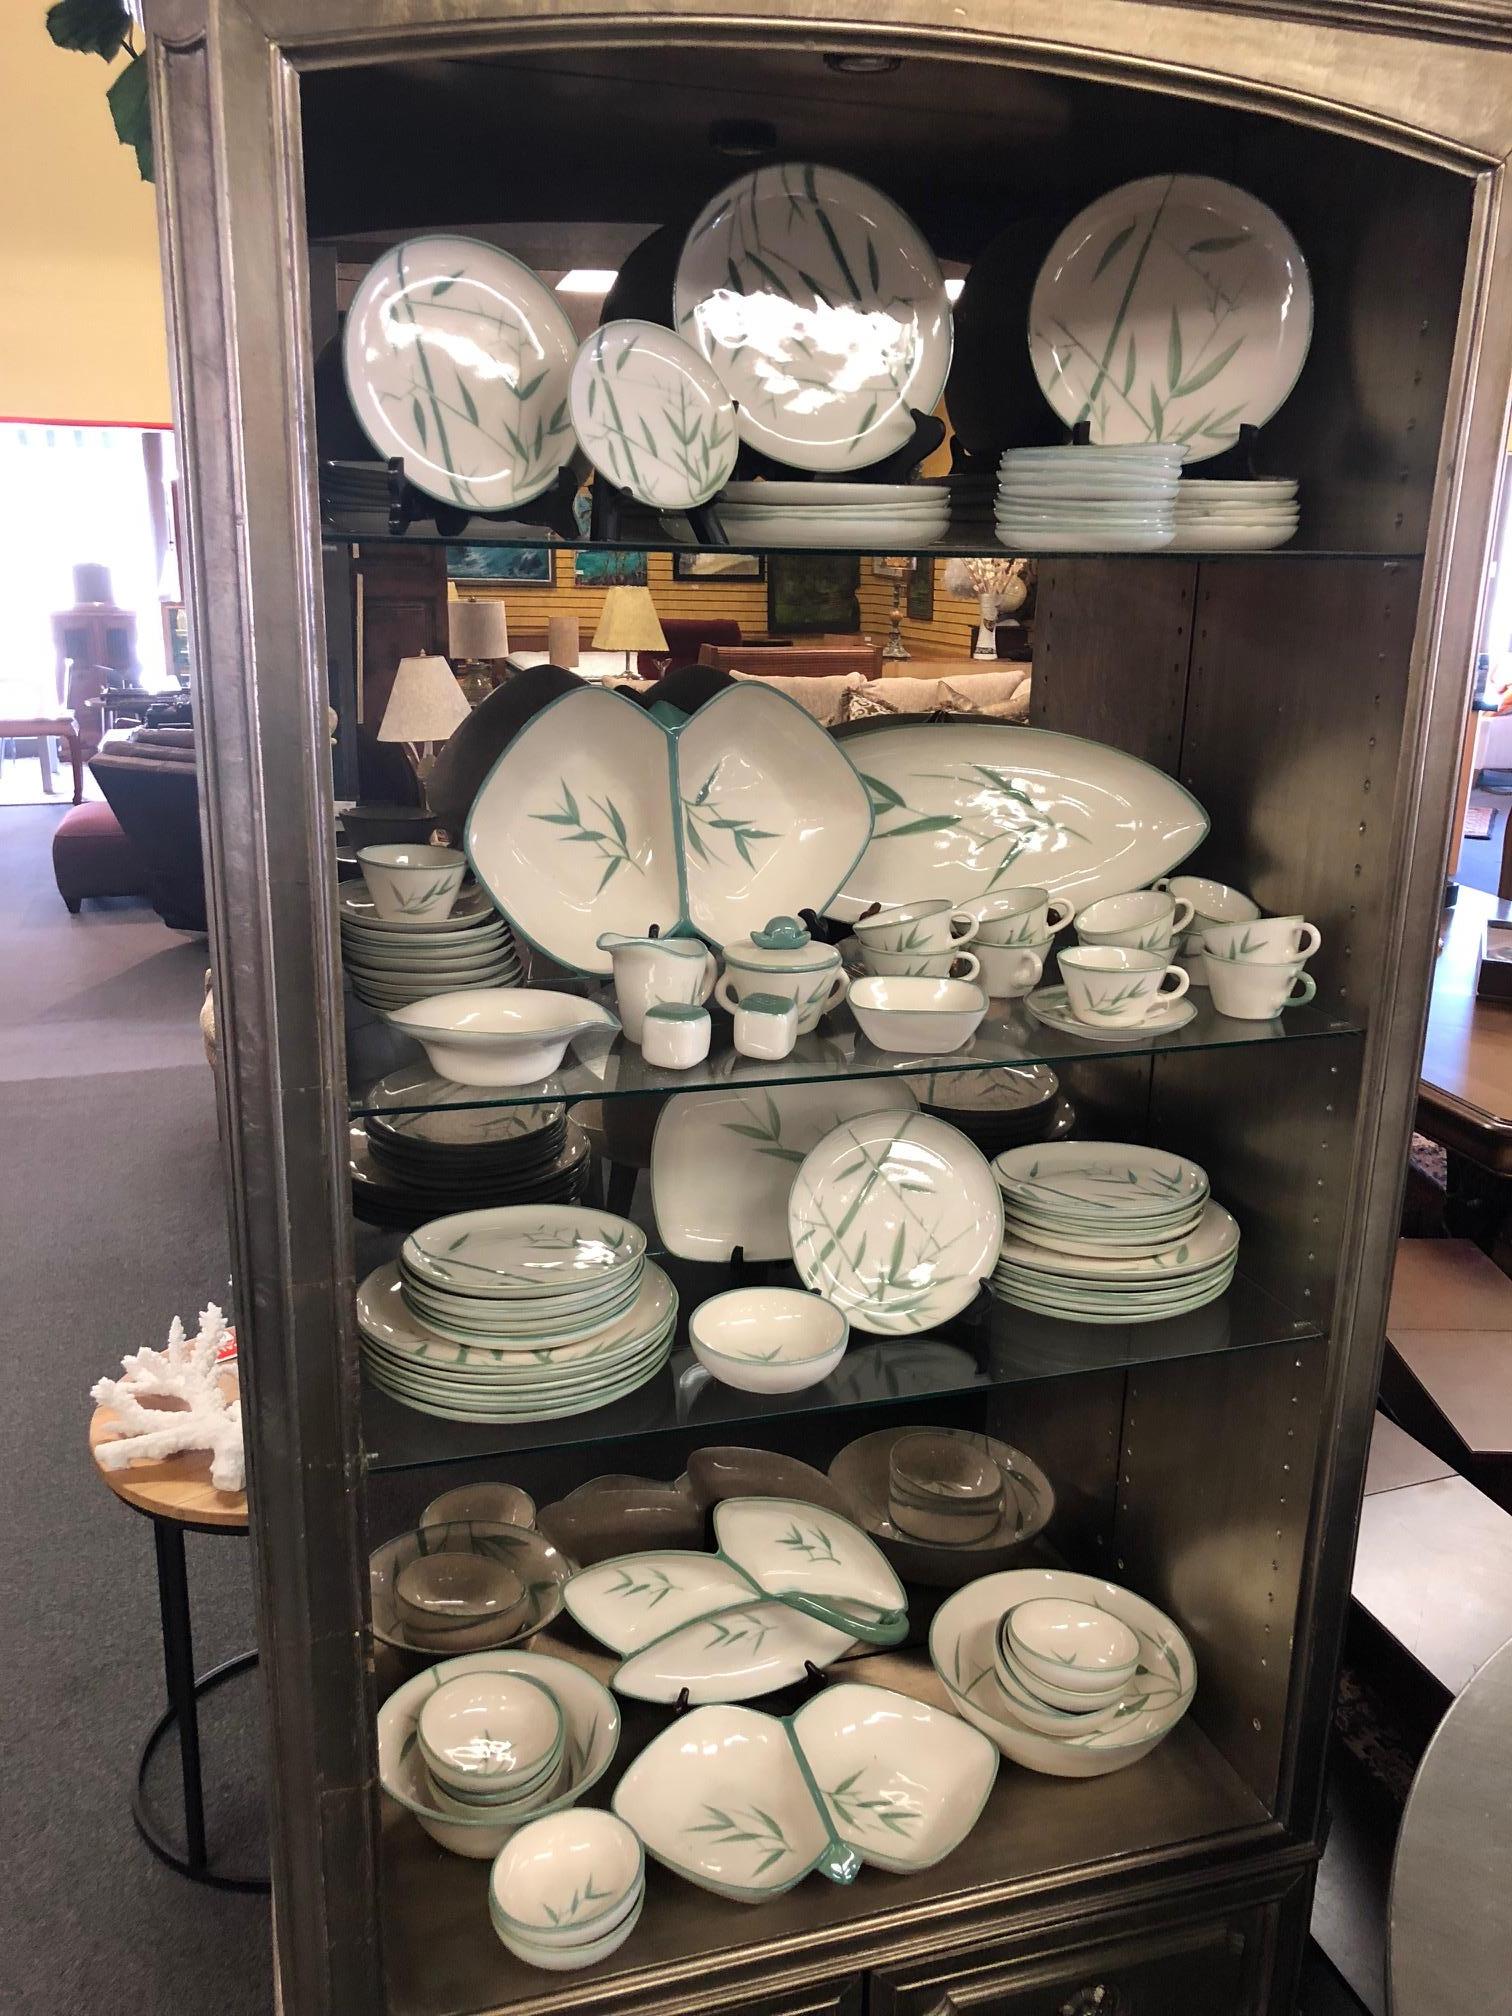 Wonderful 99 piece set of California dinnerware by Winfield Pottery Company of Pasadena, circa 1950s. The pattern is 